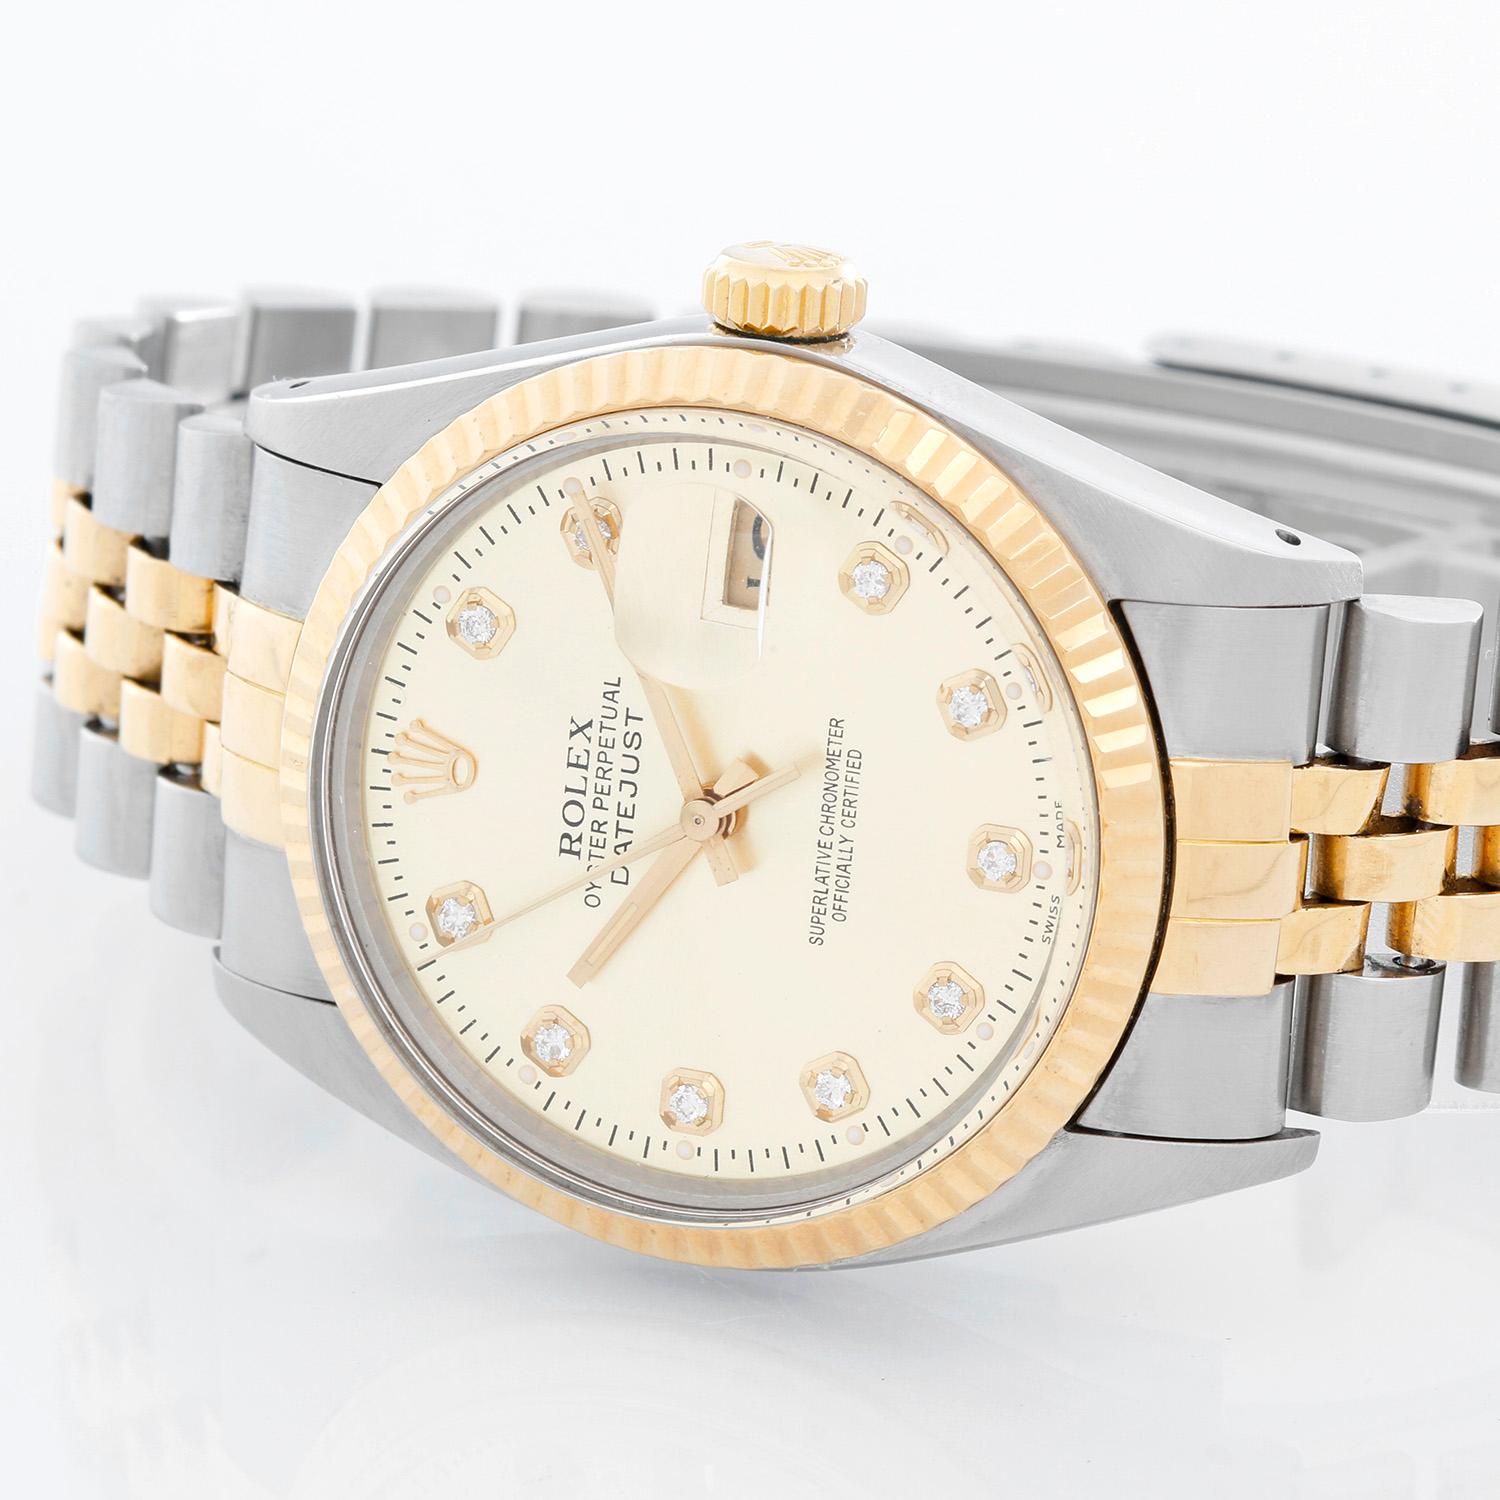 Men's Rolex Datejust 2-Tone Watch 16013 - Automatic winding, 27 jewels, Quickset, acrylic crystal. Stainless steel and 18k yellow gold fluted bezel . Champagne dial with custom diamond hour markers. Stainless steel and 18k yellow gold Jubilee